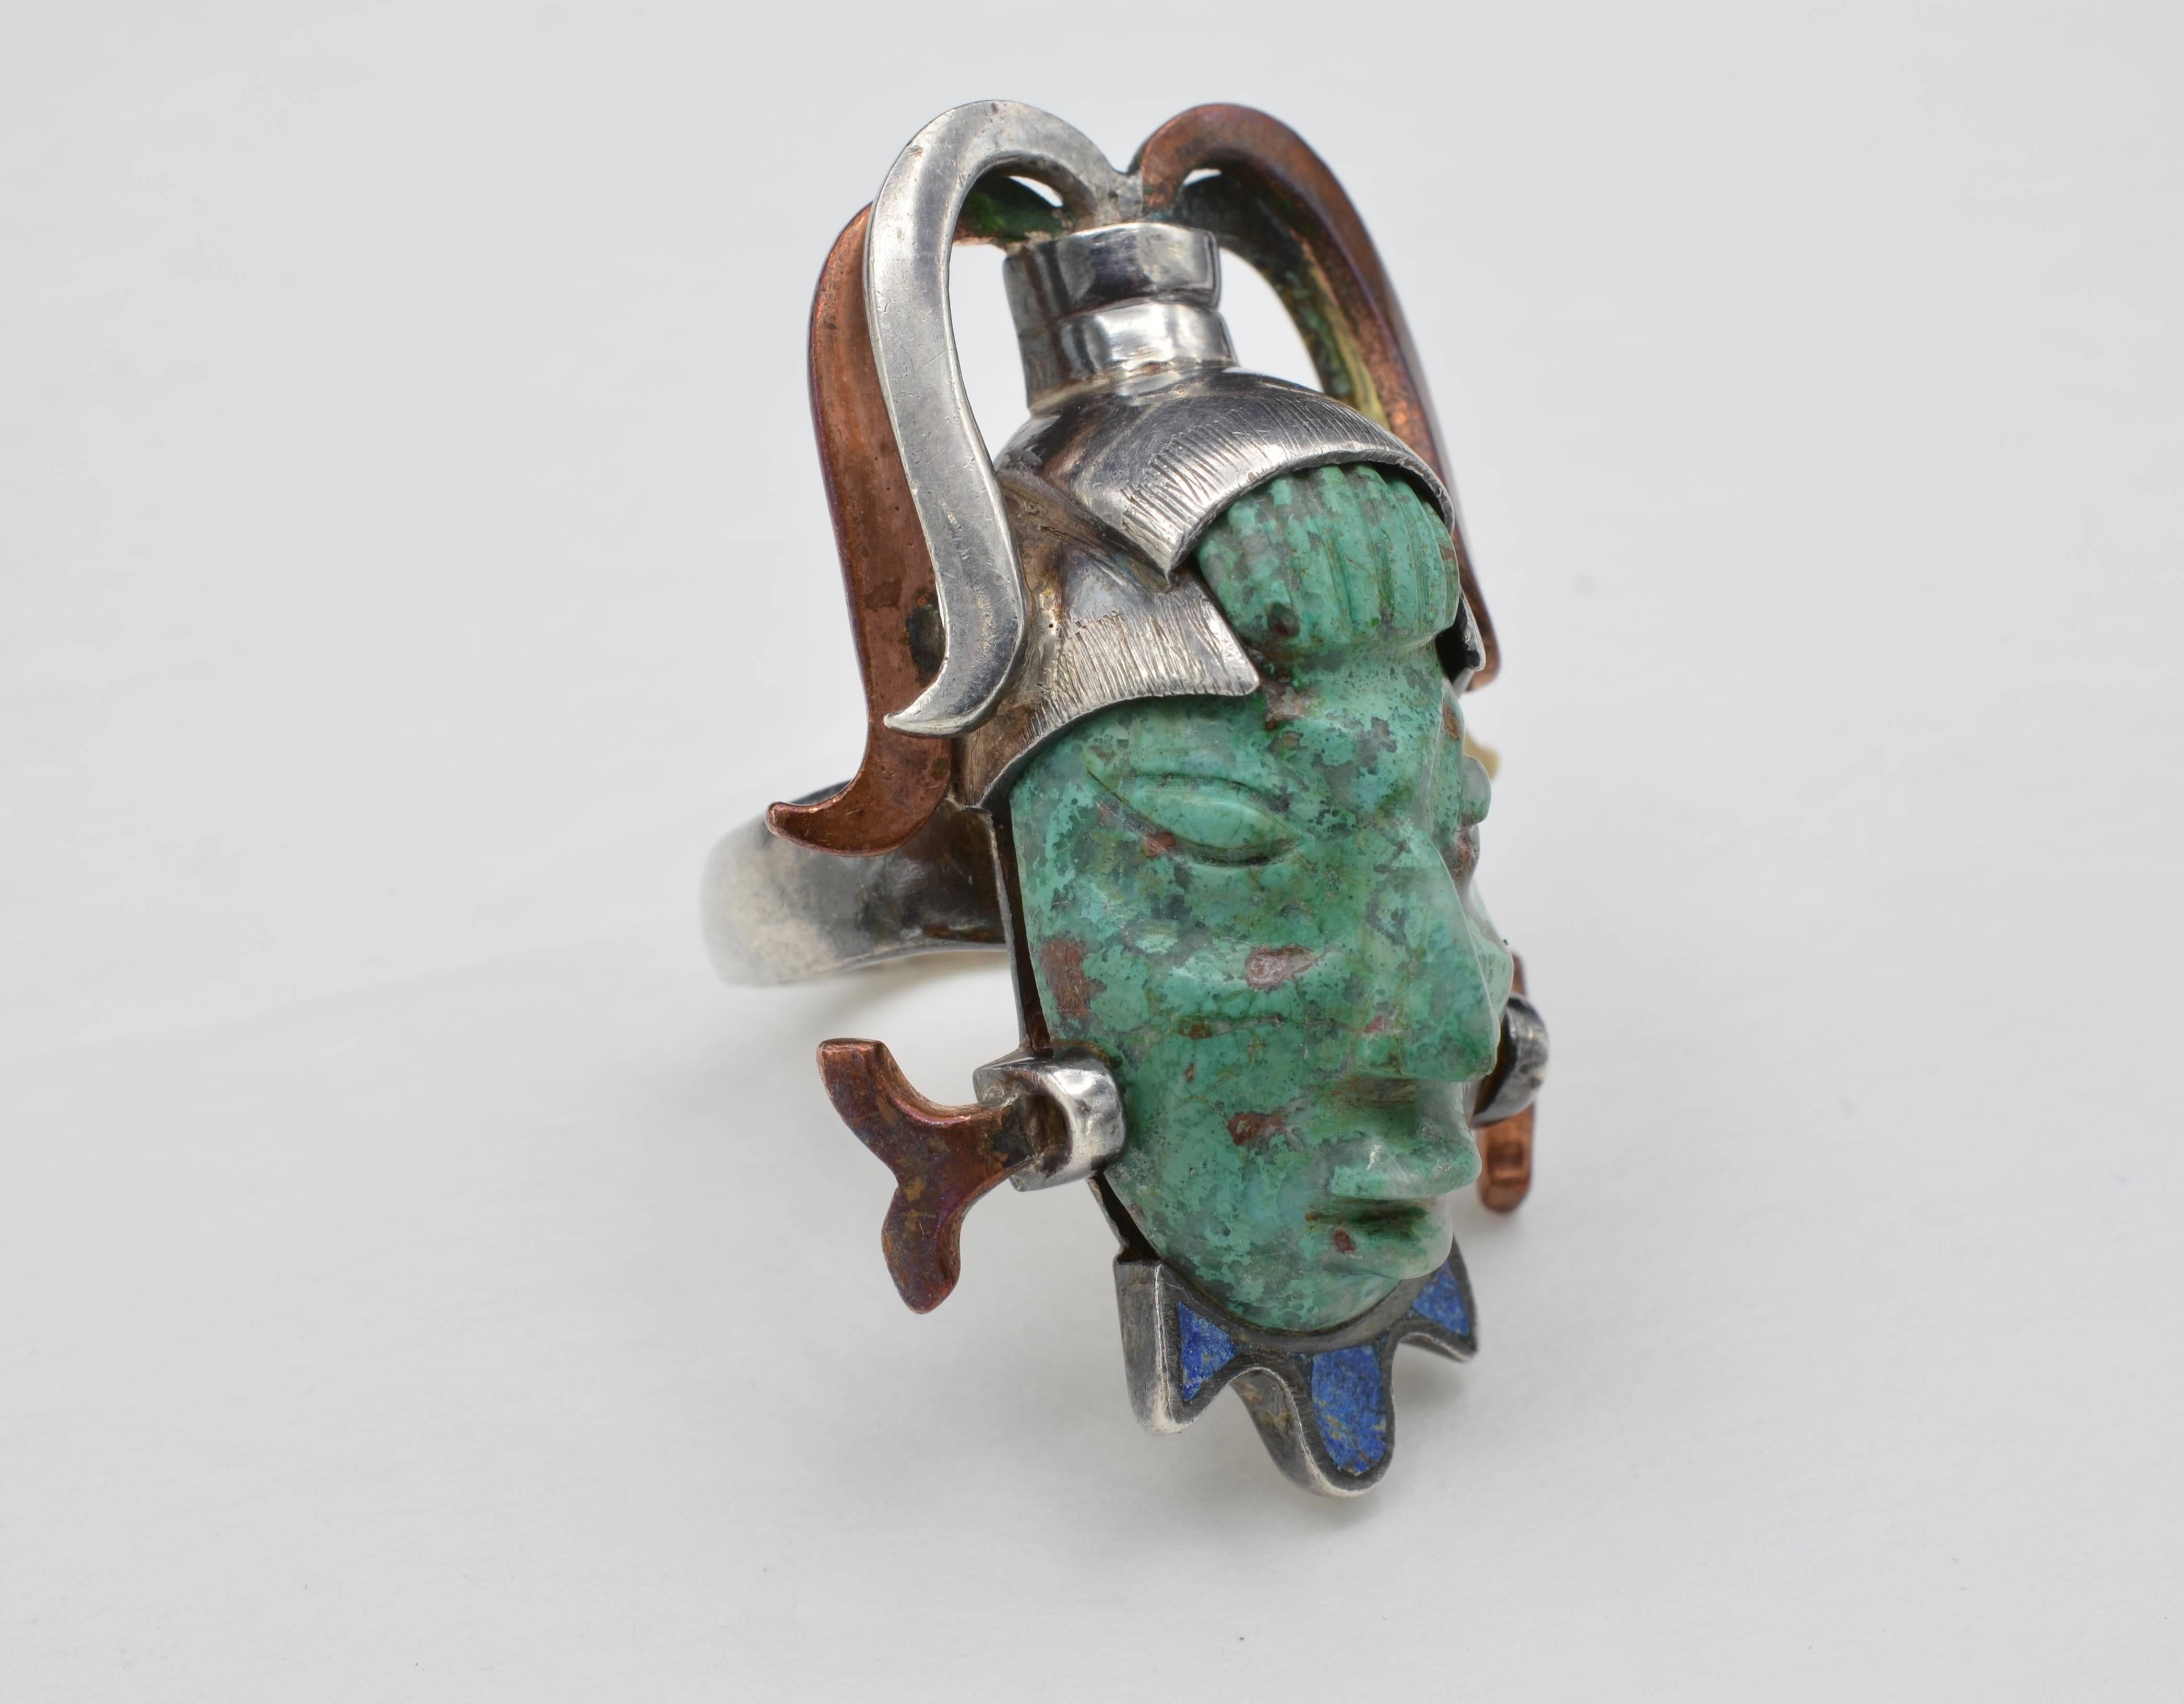 This very unusual carved Indian face with inlayed lapis neck design in set in sterling silver, brass and copper. The ring is a size 7 and it is adjustable. A wonderful conversation piece!!